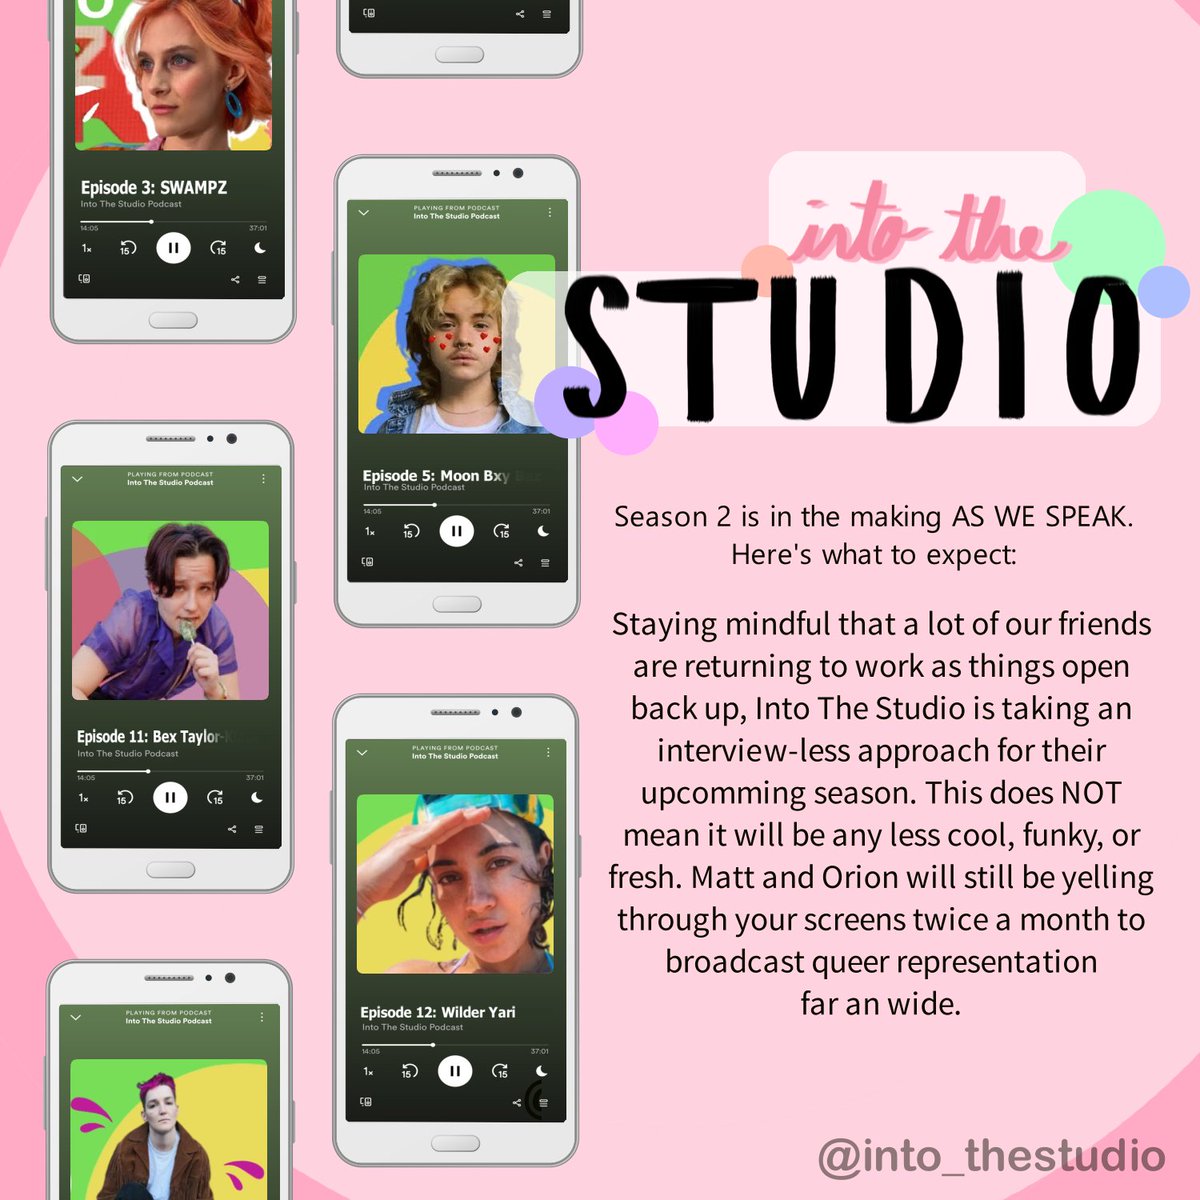 Now is as good a time as any to rewatch the last season of Into The Studio! Catch up all of our guest interviews andmeet us back here when S2 EP1 drops!

#podcast #podcasting #podcastinglife #newseason #nextseason #queer #lgbtq #queerpodcast #queercreators #queerrepresentation